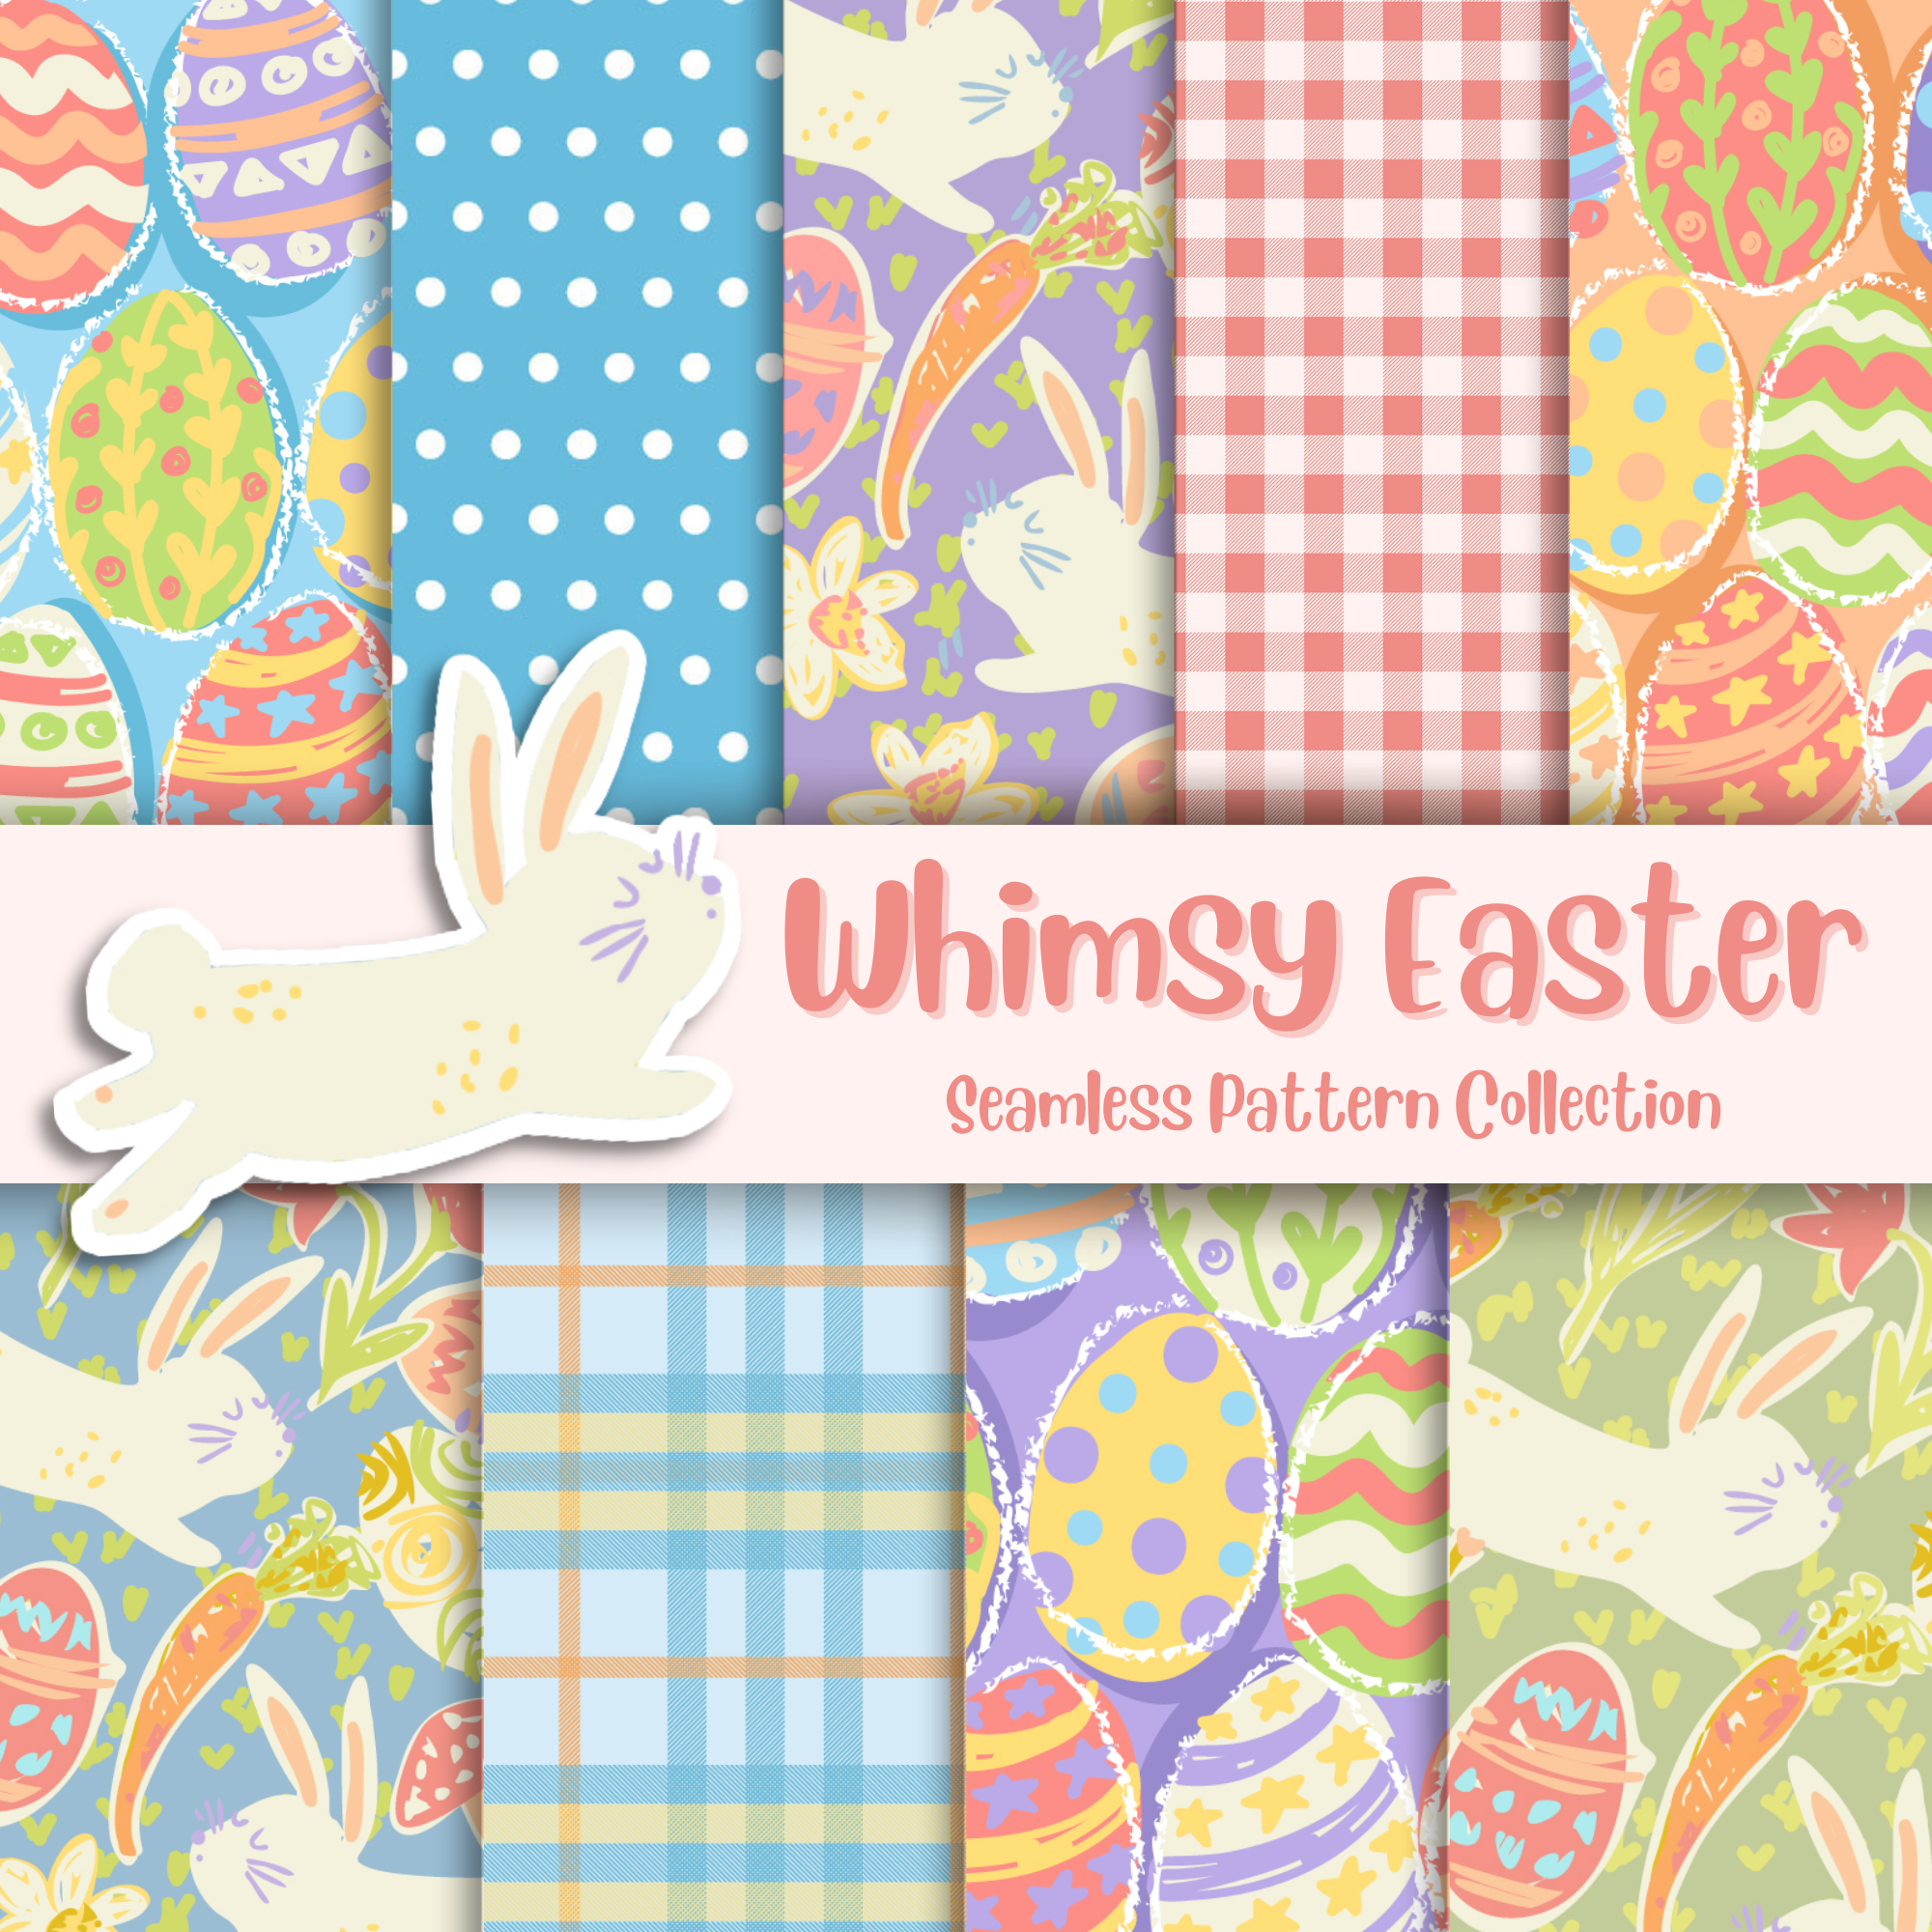 "Whimsy Easter" Digital Collection